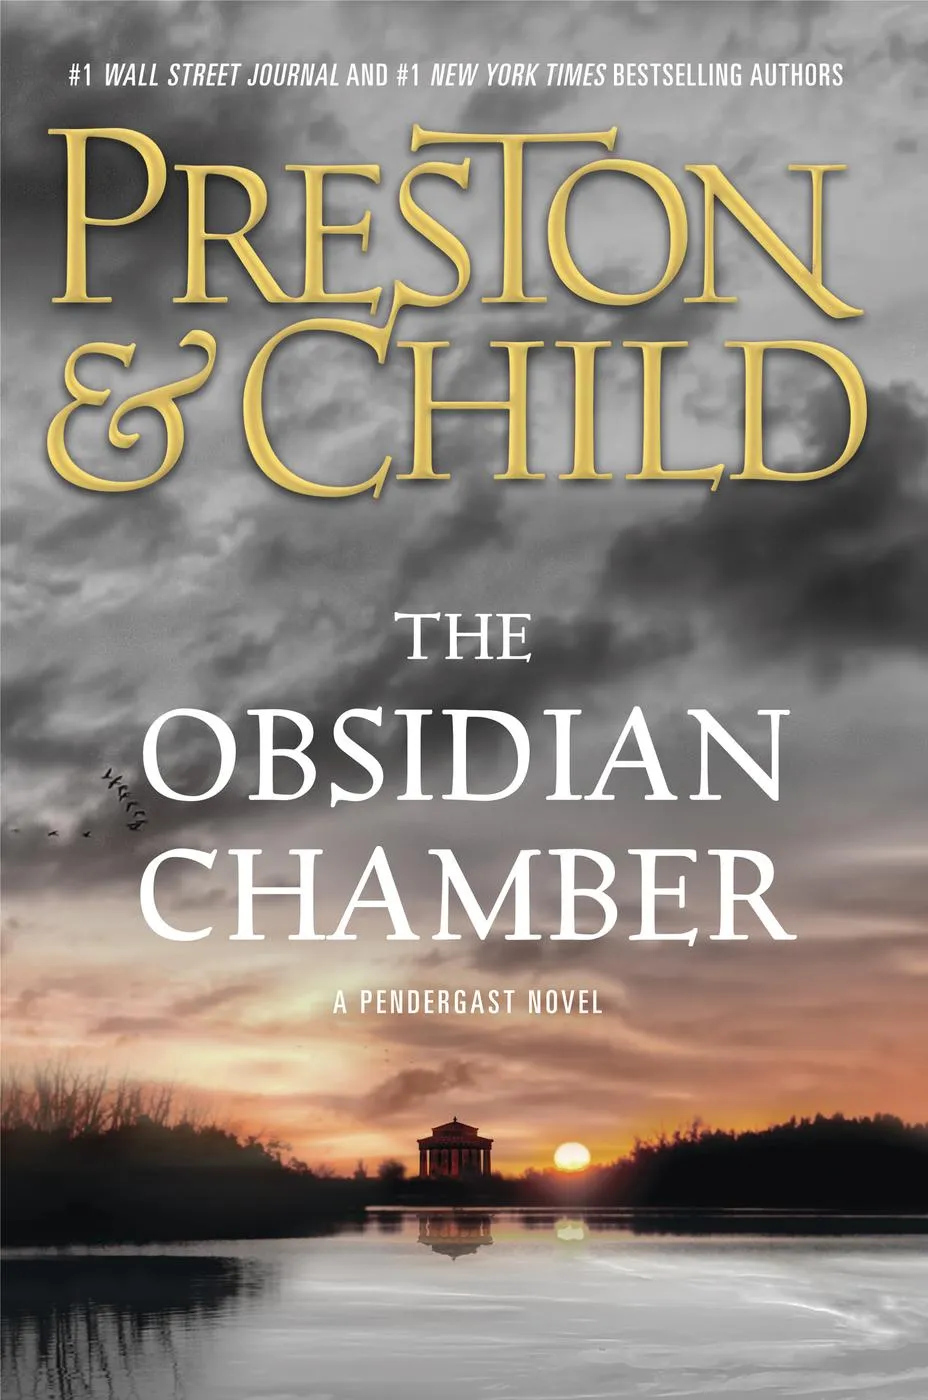 The Obsidian Chamber (Agent Pendergast #16)